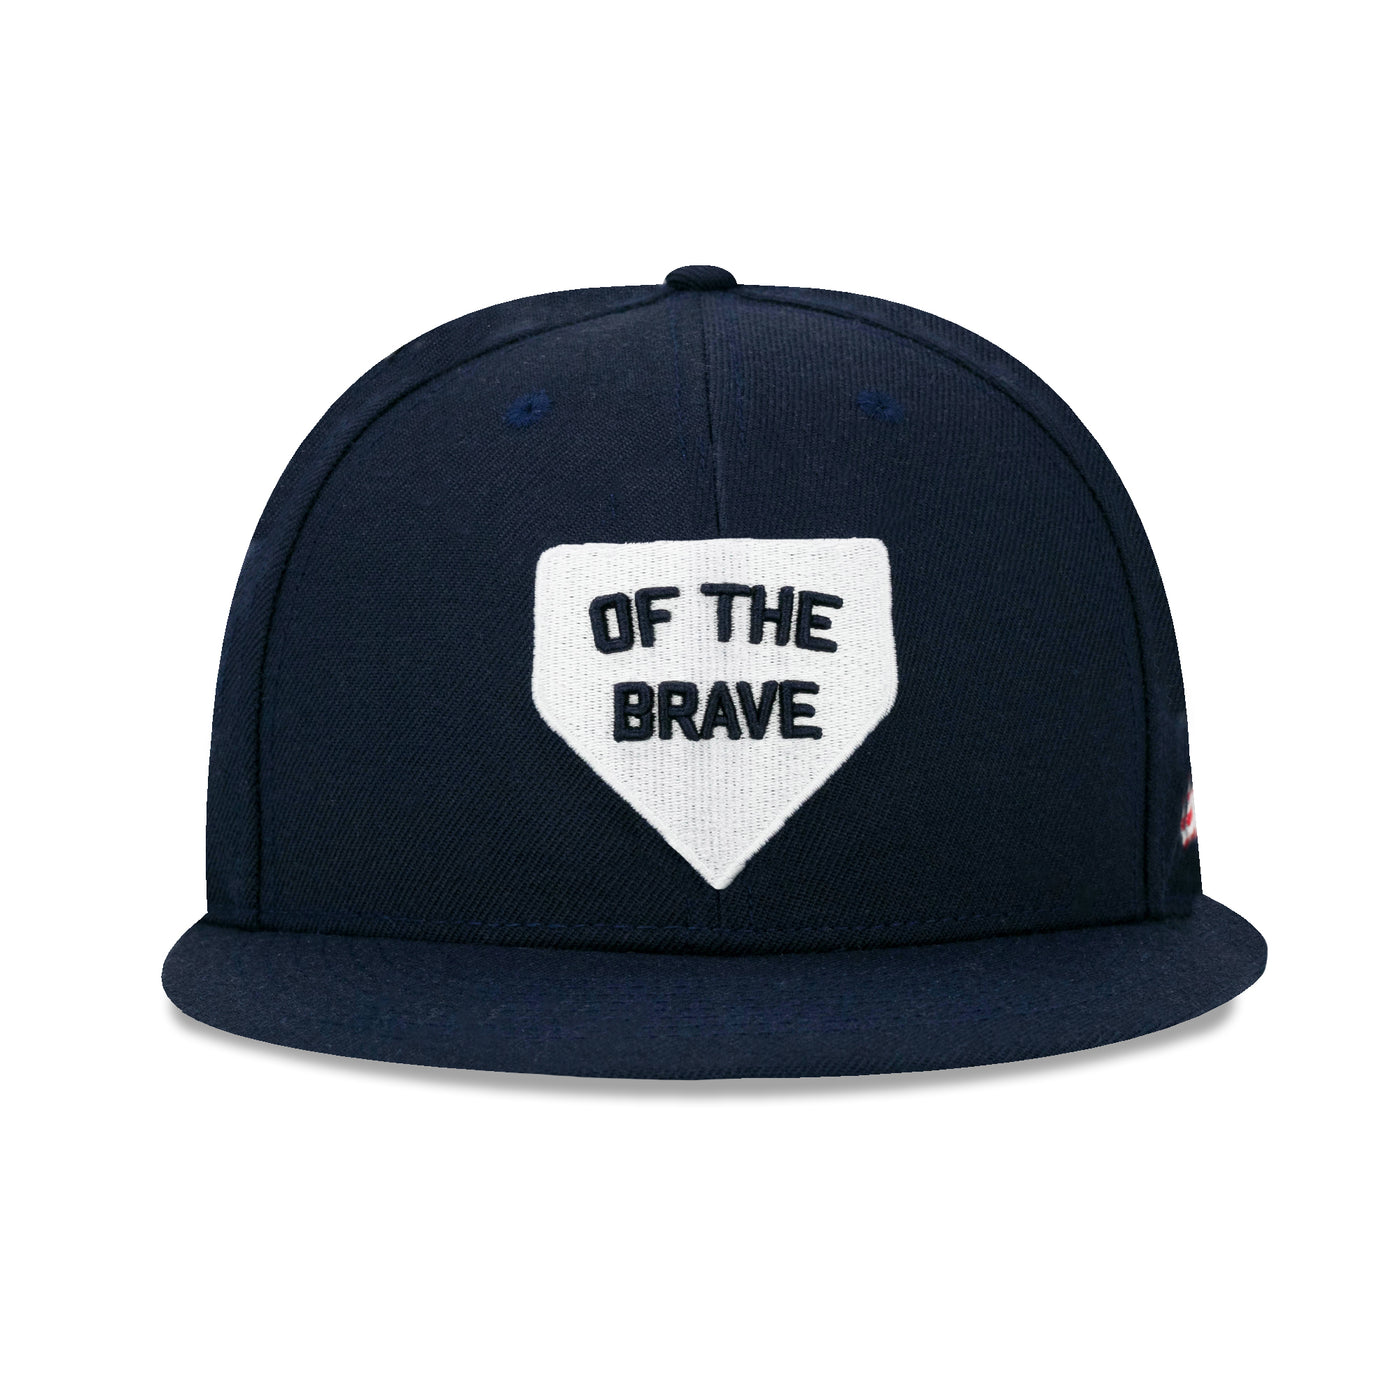 Home of the Brave Cap